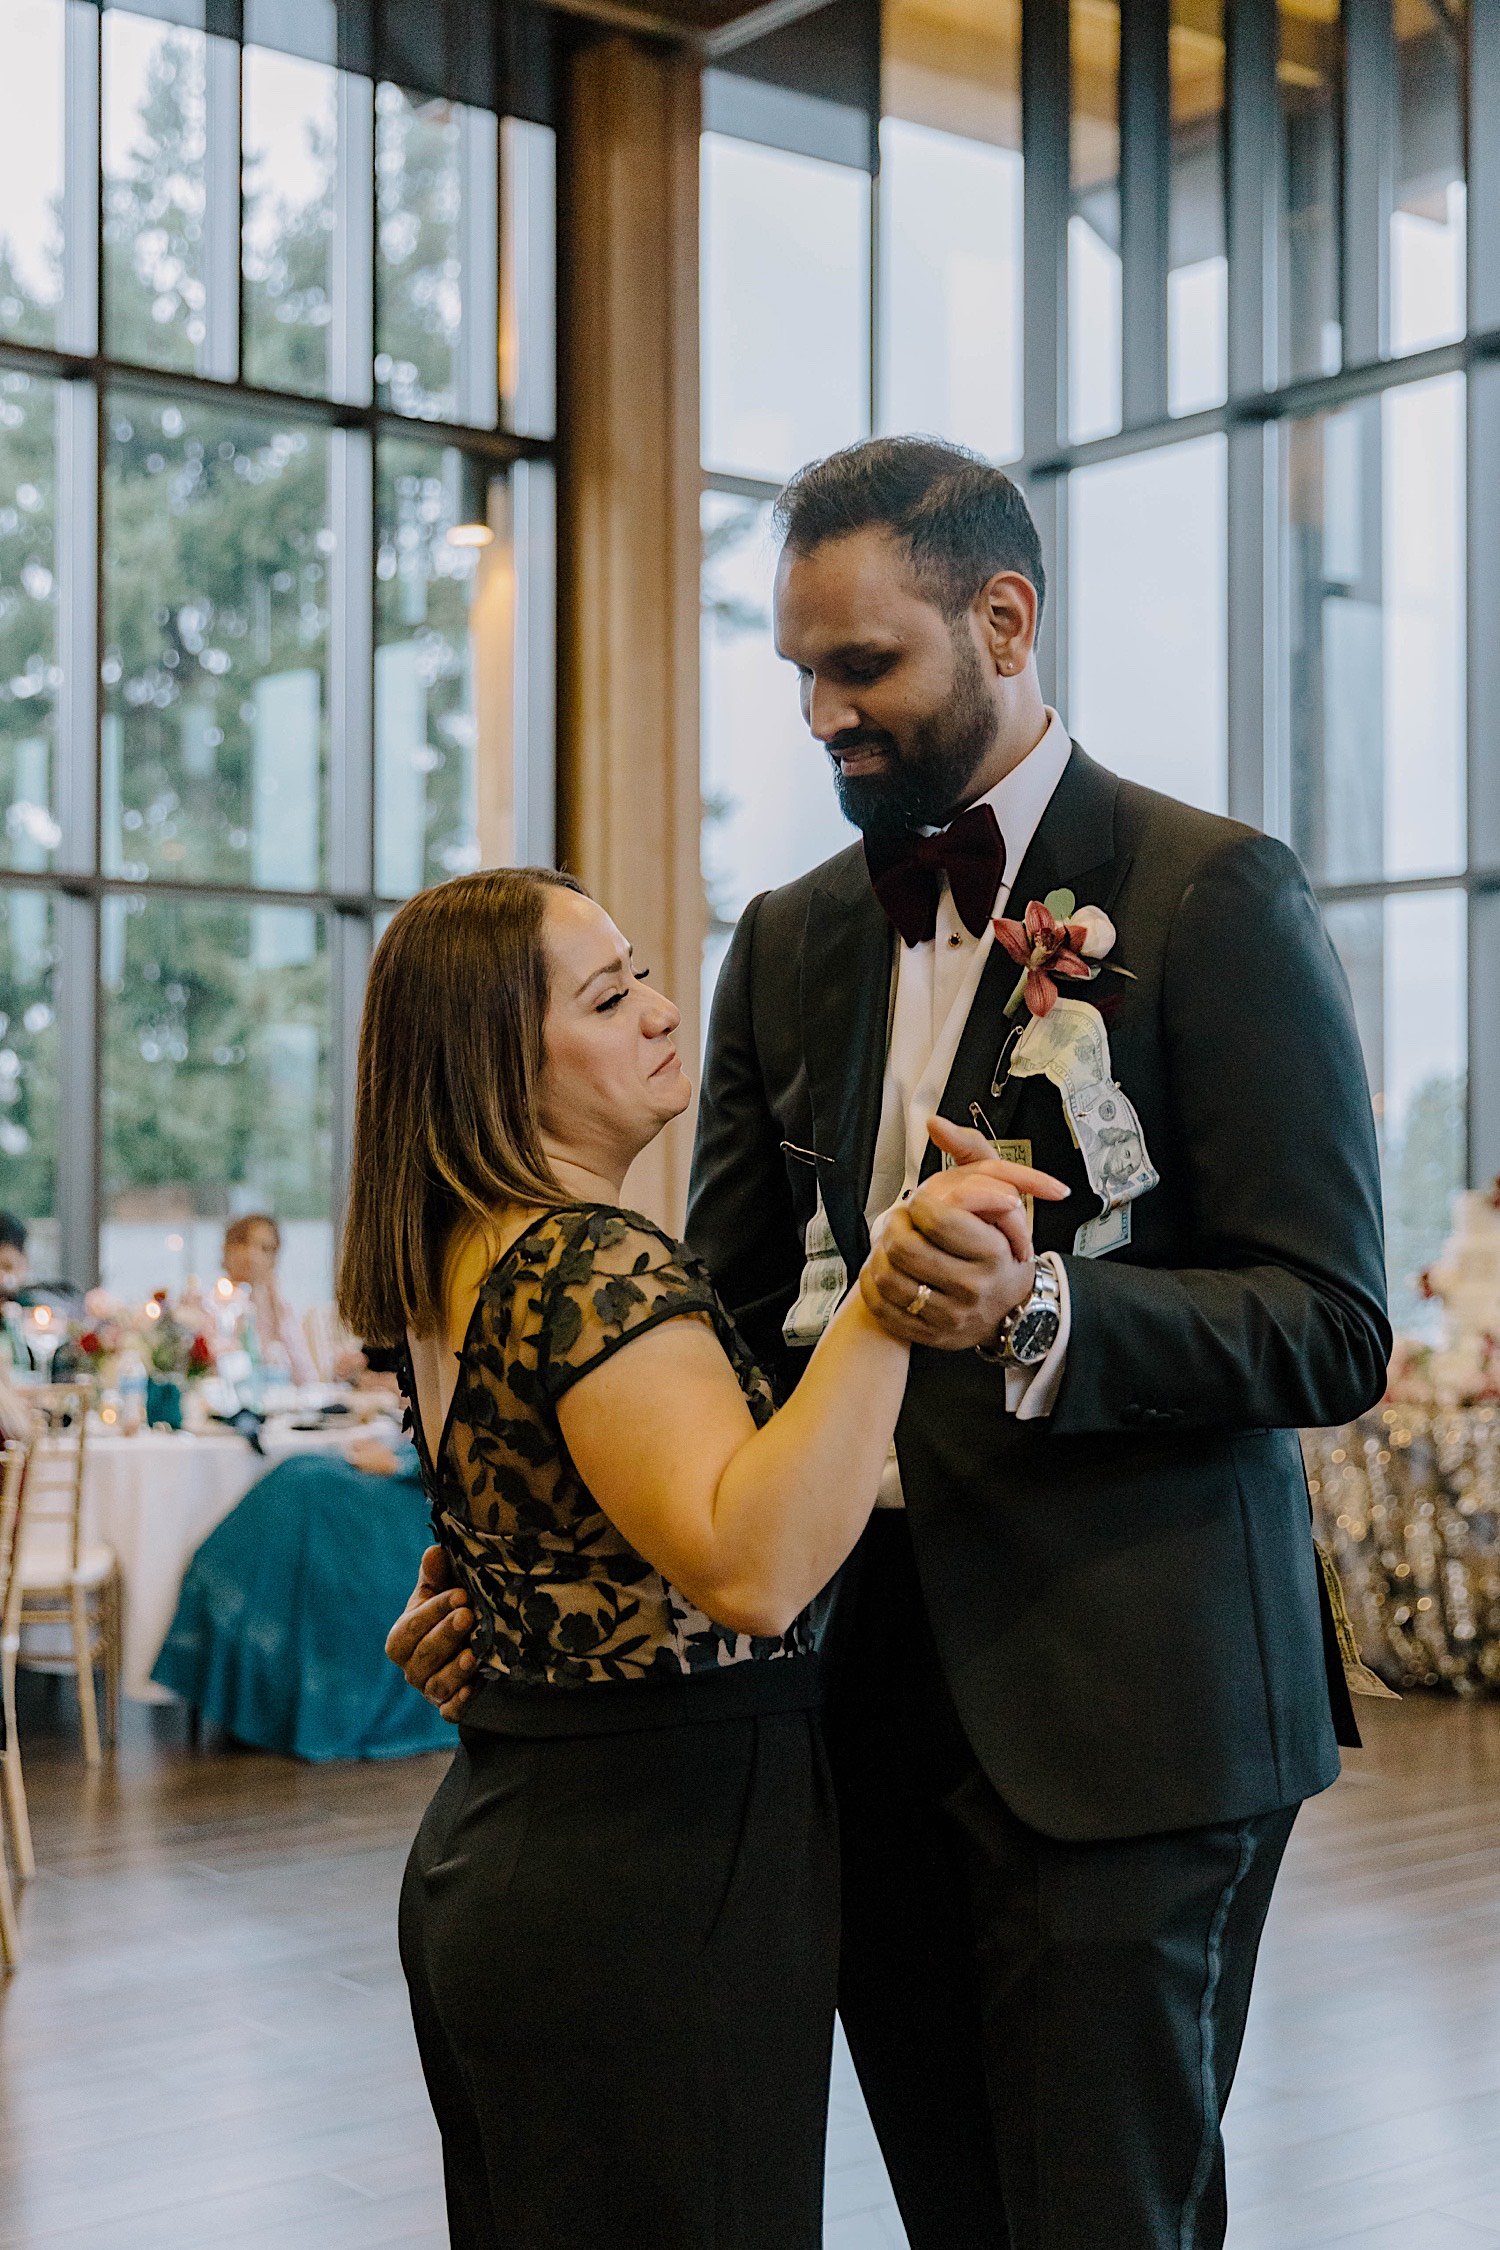 Groom and mother share a dance together as wedding guests sit in the background